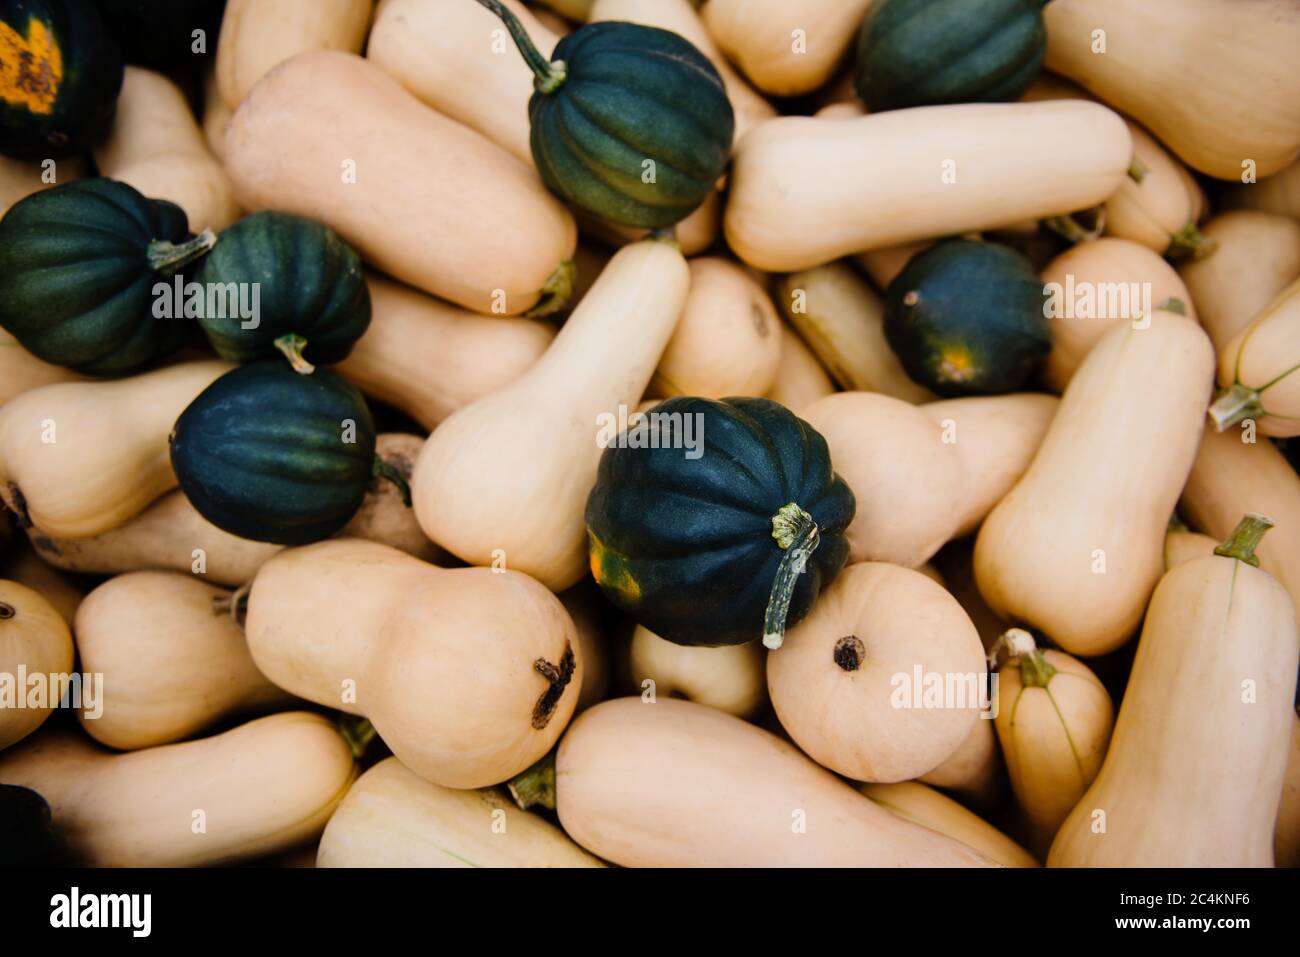 Butternut squash and acorn squash at the market Stock Photo